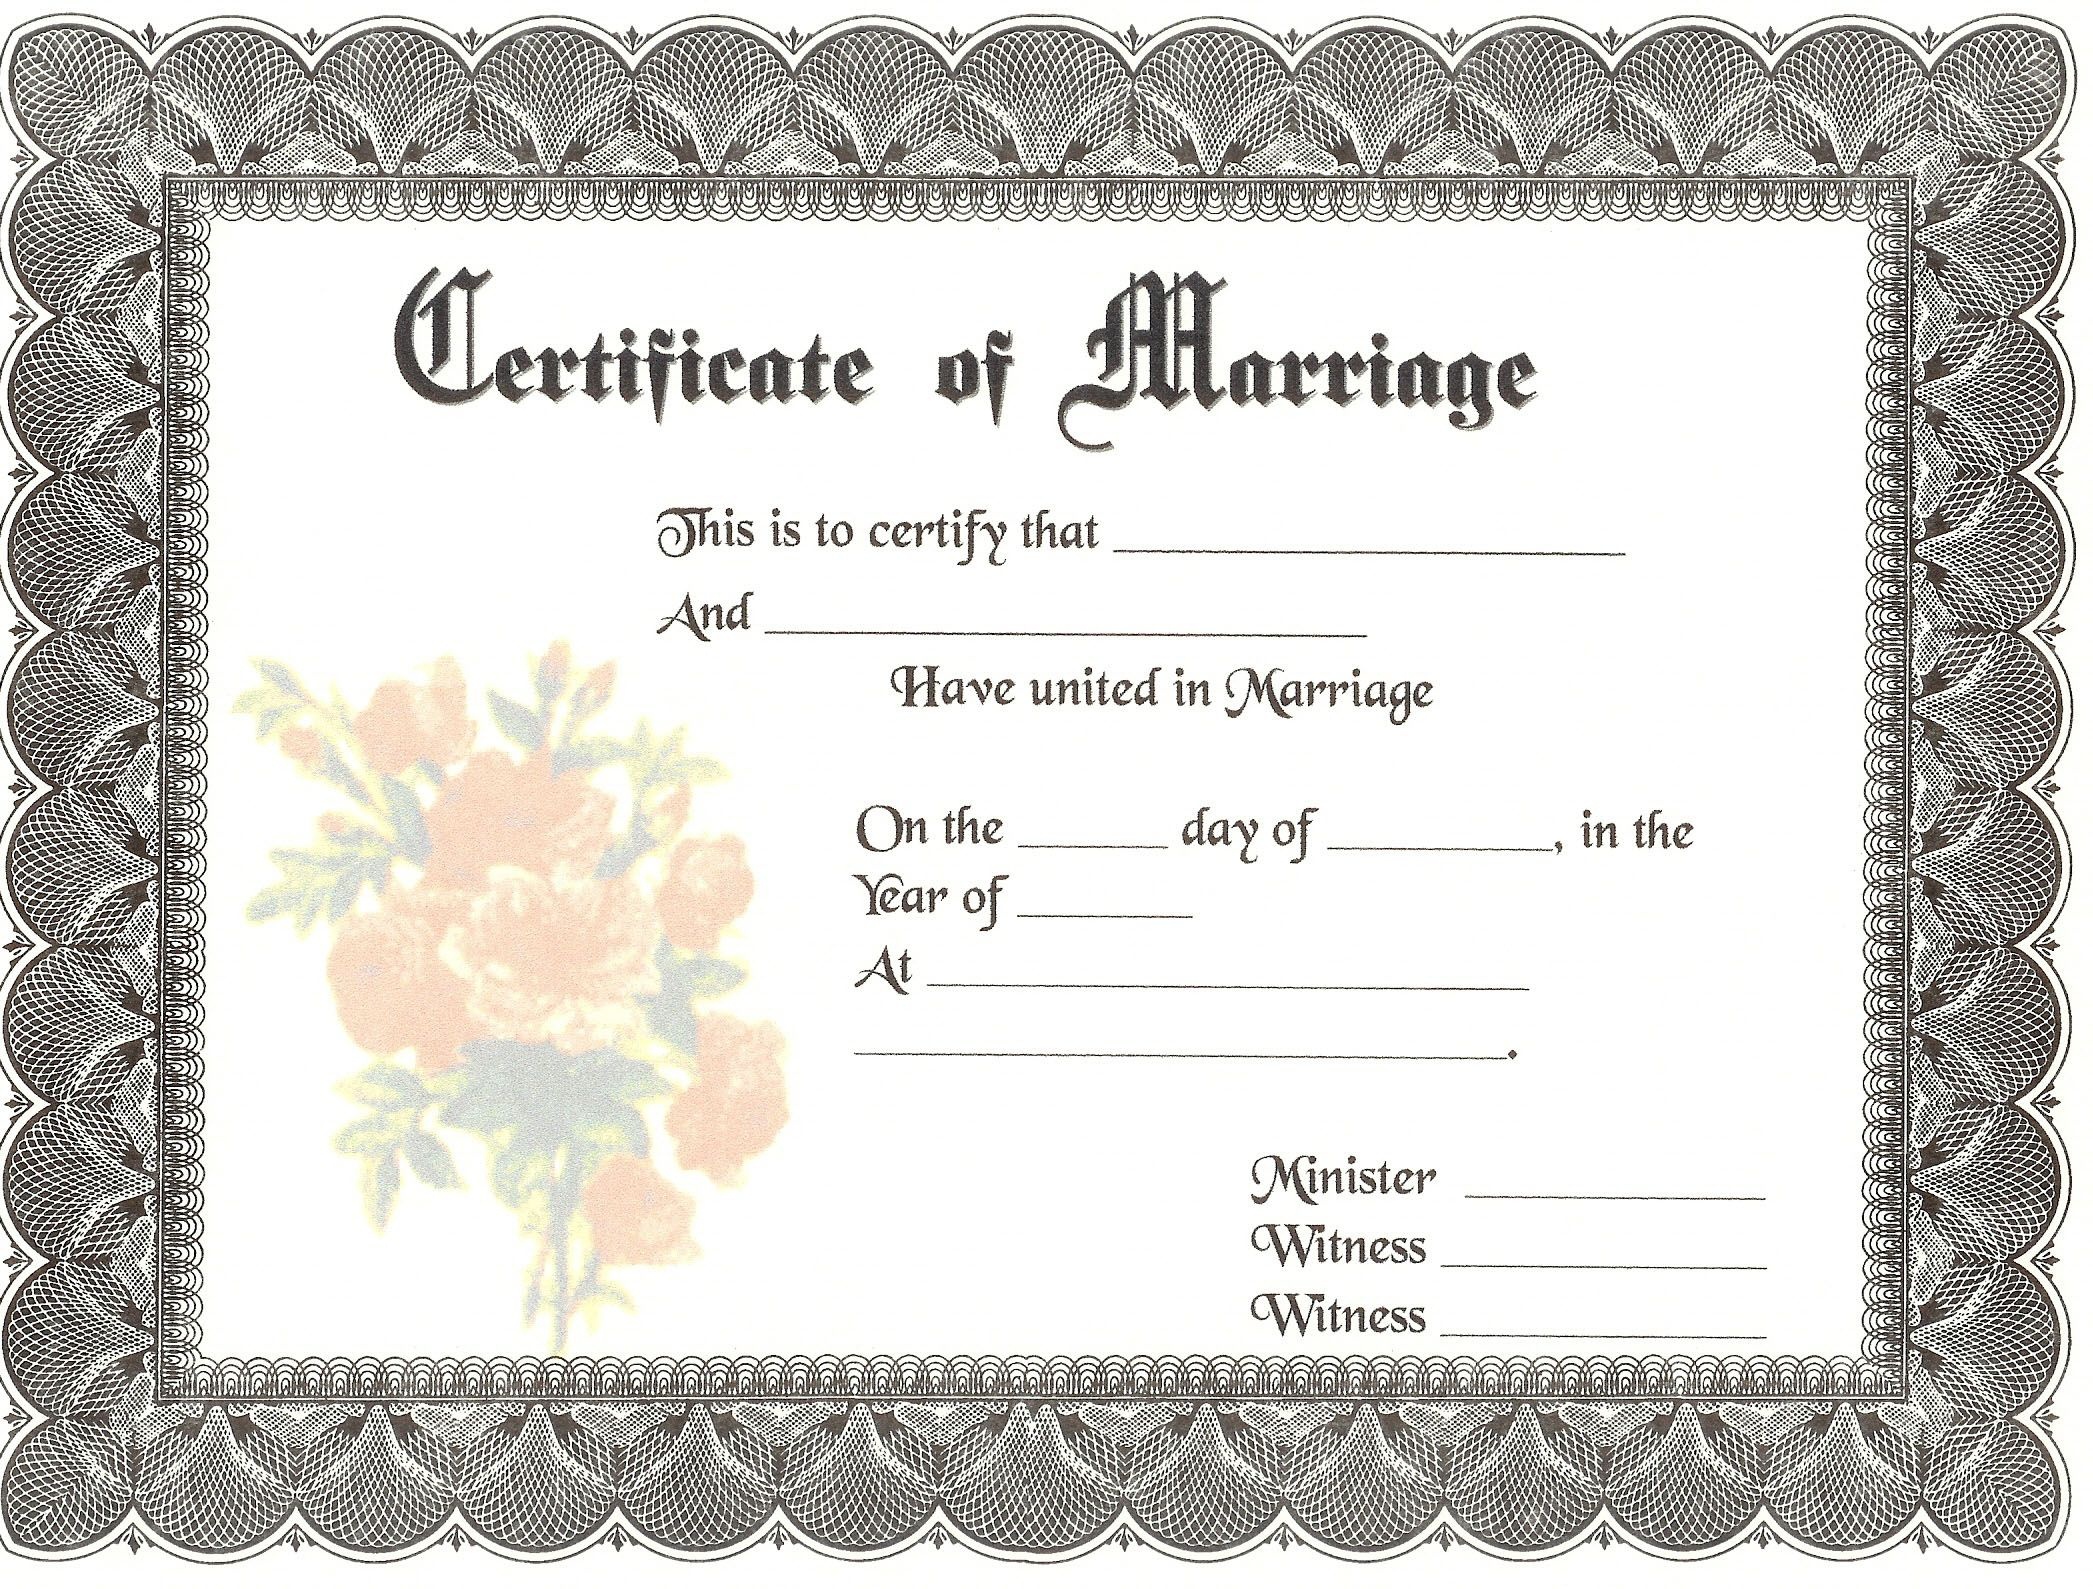 Blank Marriage Certificates | Download Blank Marriage Certificates - Free Printable Wedding Certificates